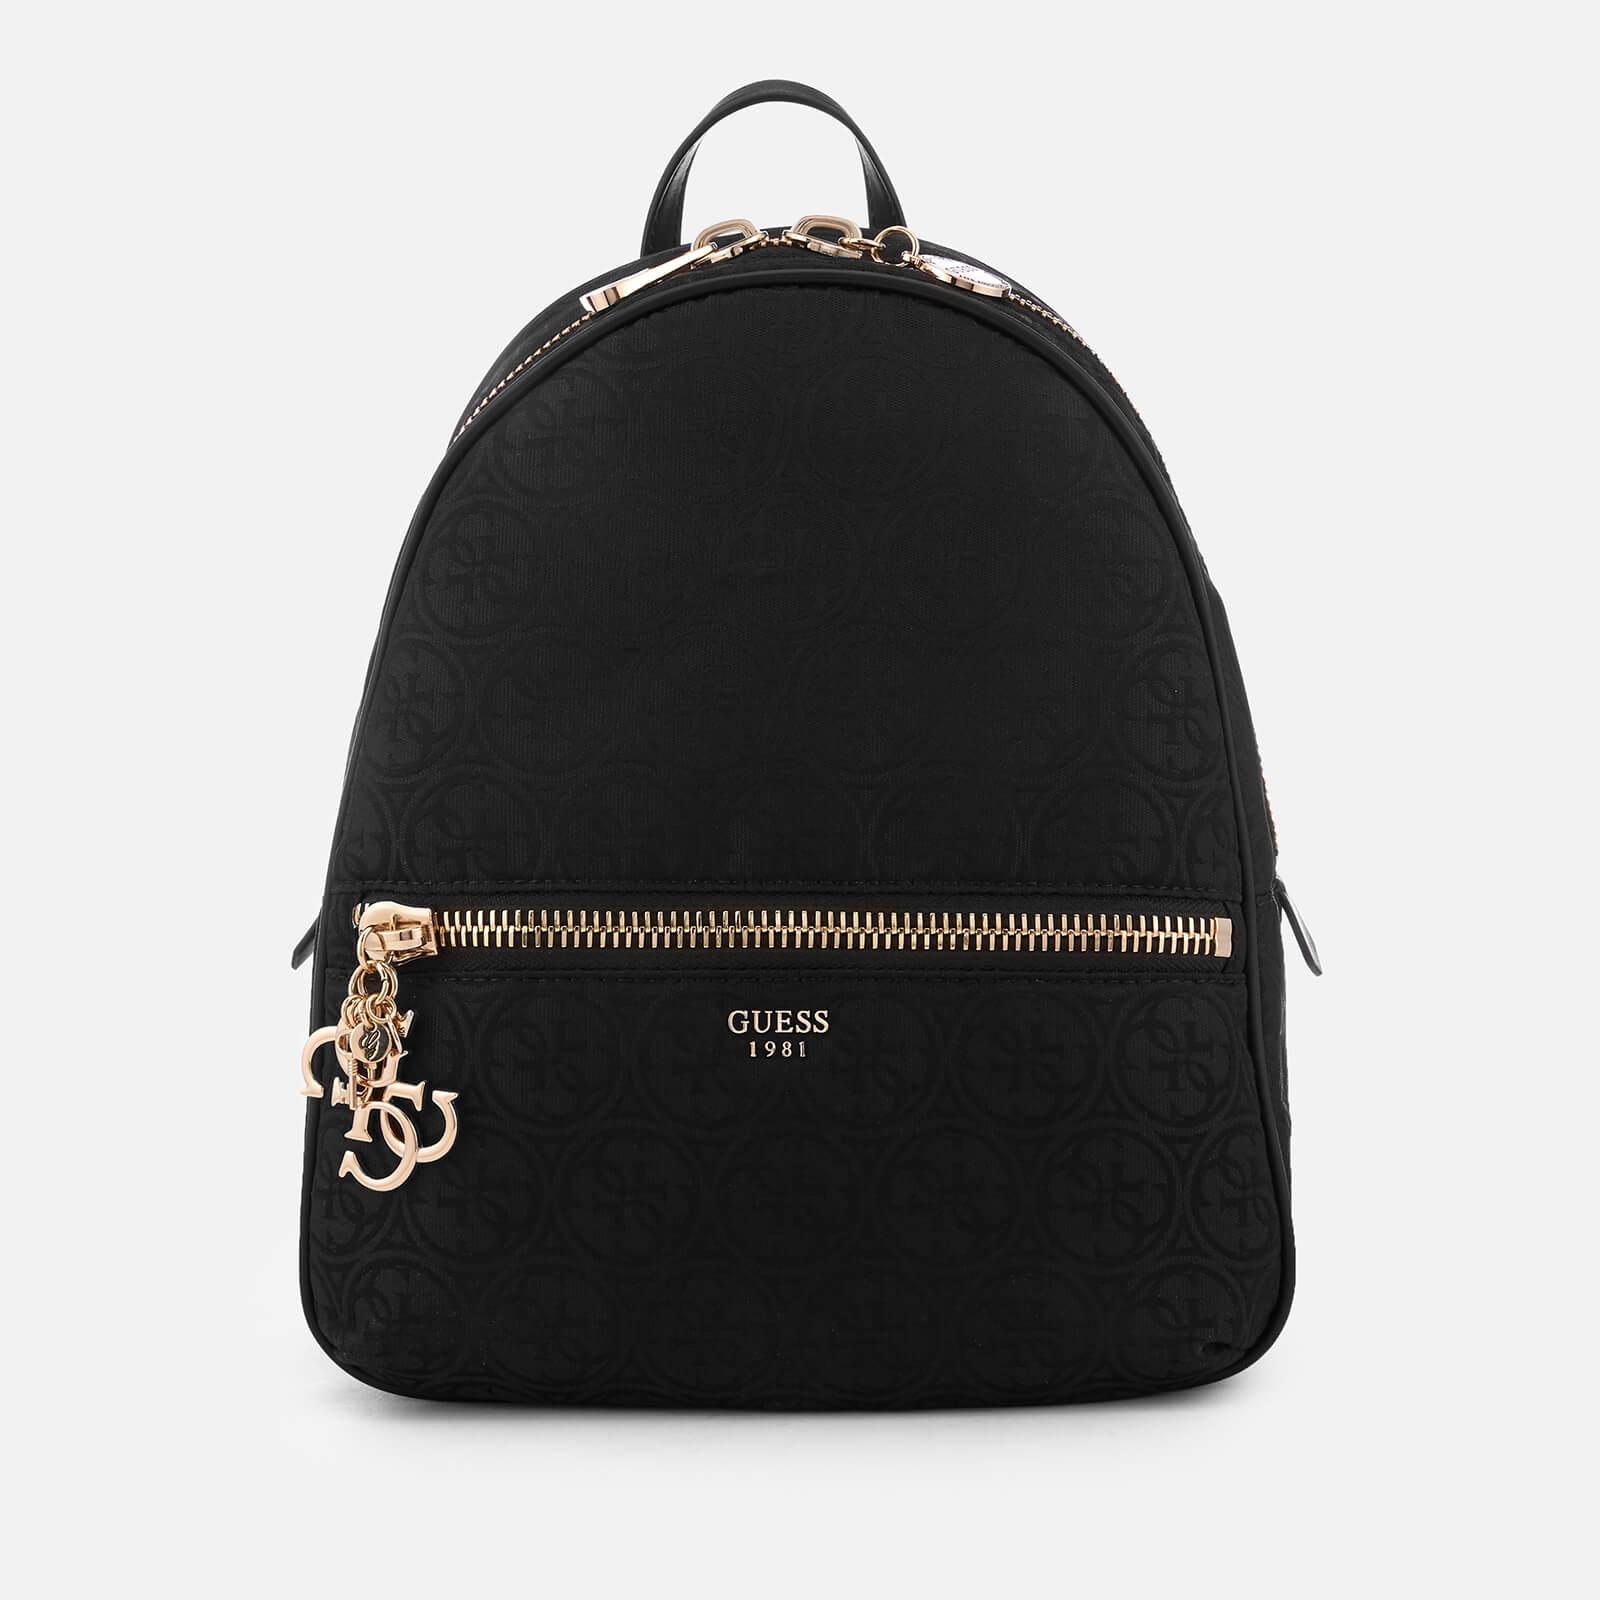 Guess Urban Chic Large Backpack in Black | Lyst Canada